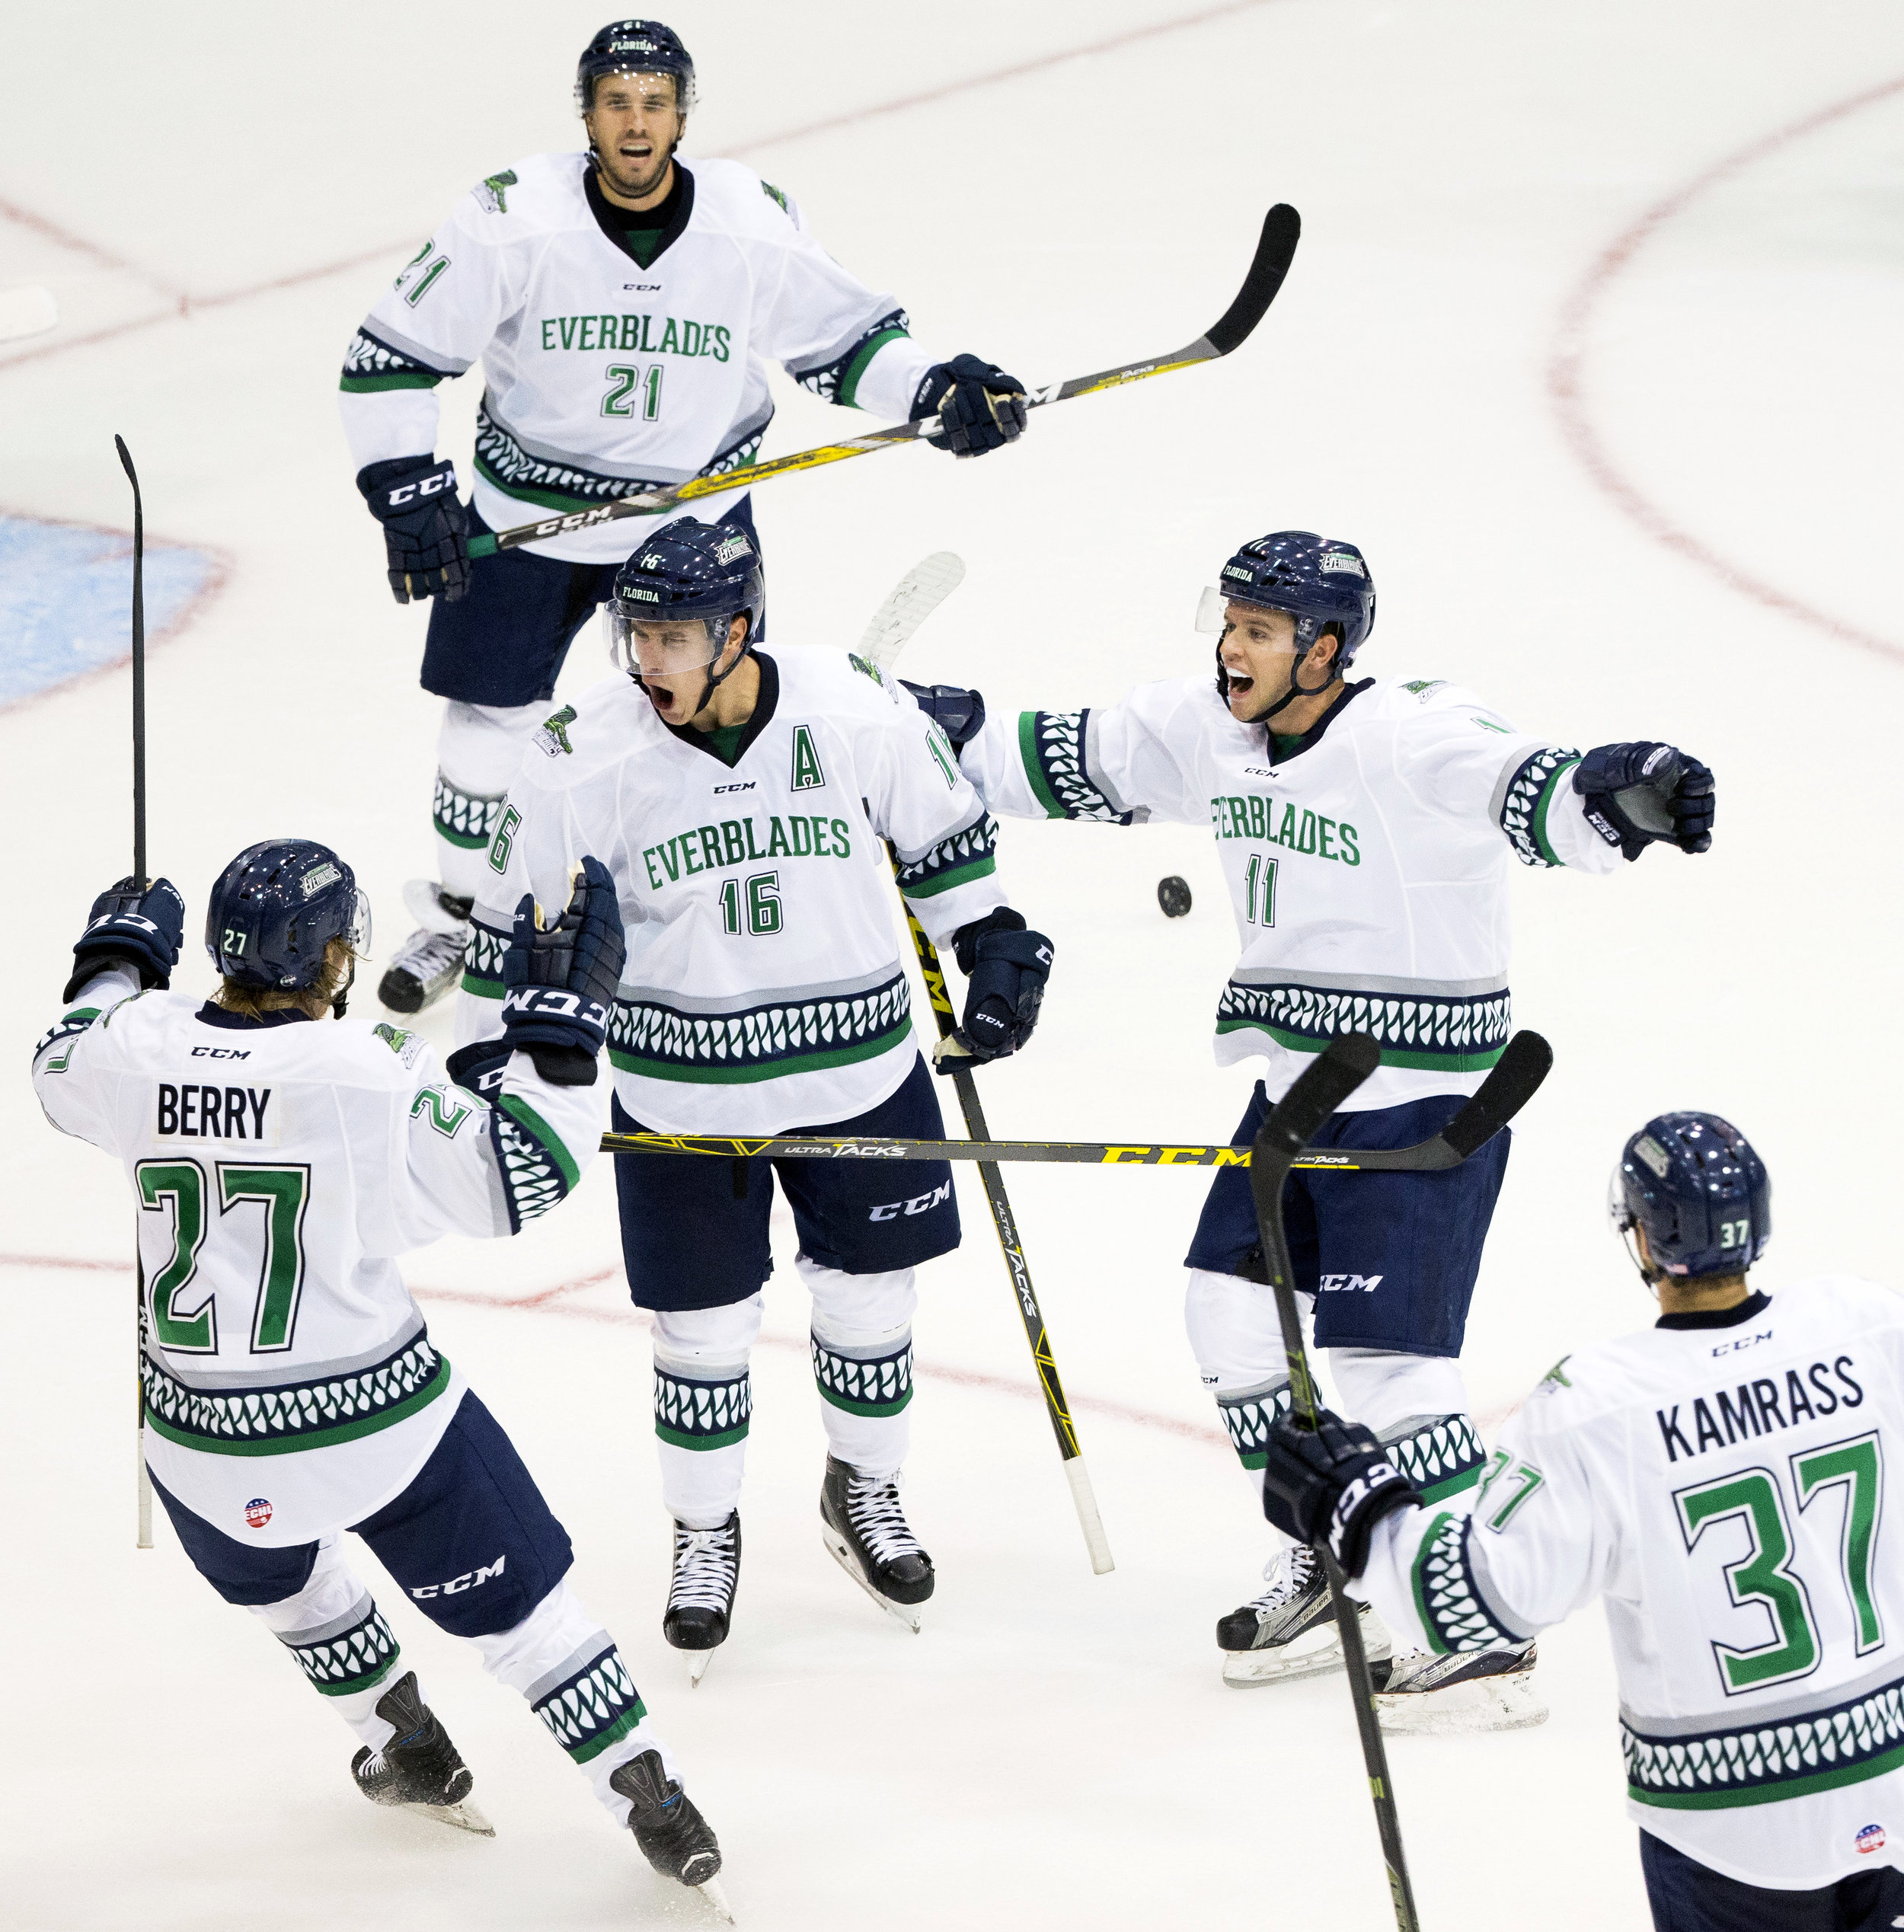  Florida Everblades' players celebrate with Mike Aviani (16) after Aviani scored the game-tying goal with 59 seconds left in the third period of action at Germain Arena Friday, October 14, 2016 in Estero, Fla. The Everblades would score all of their 